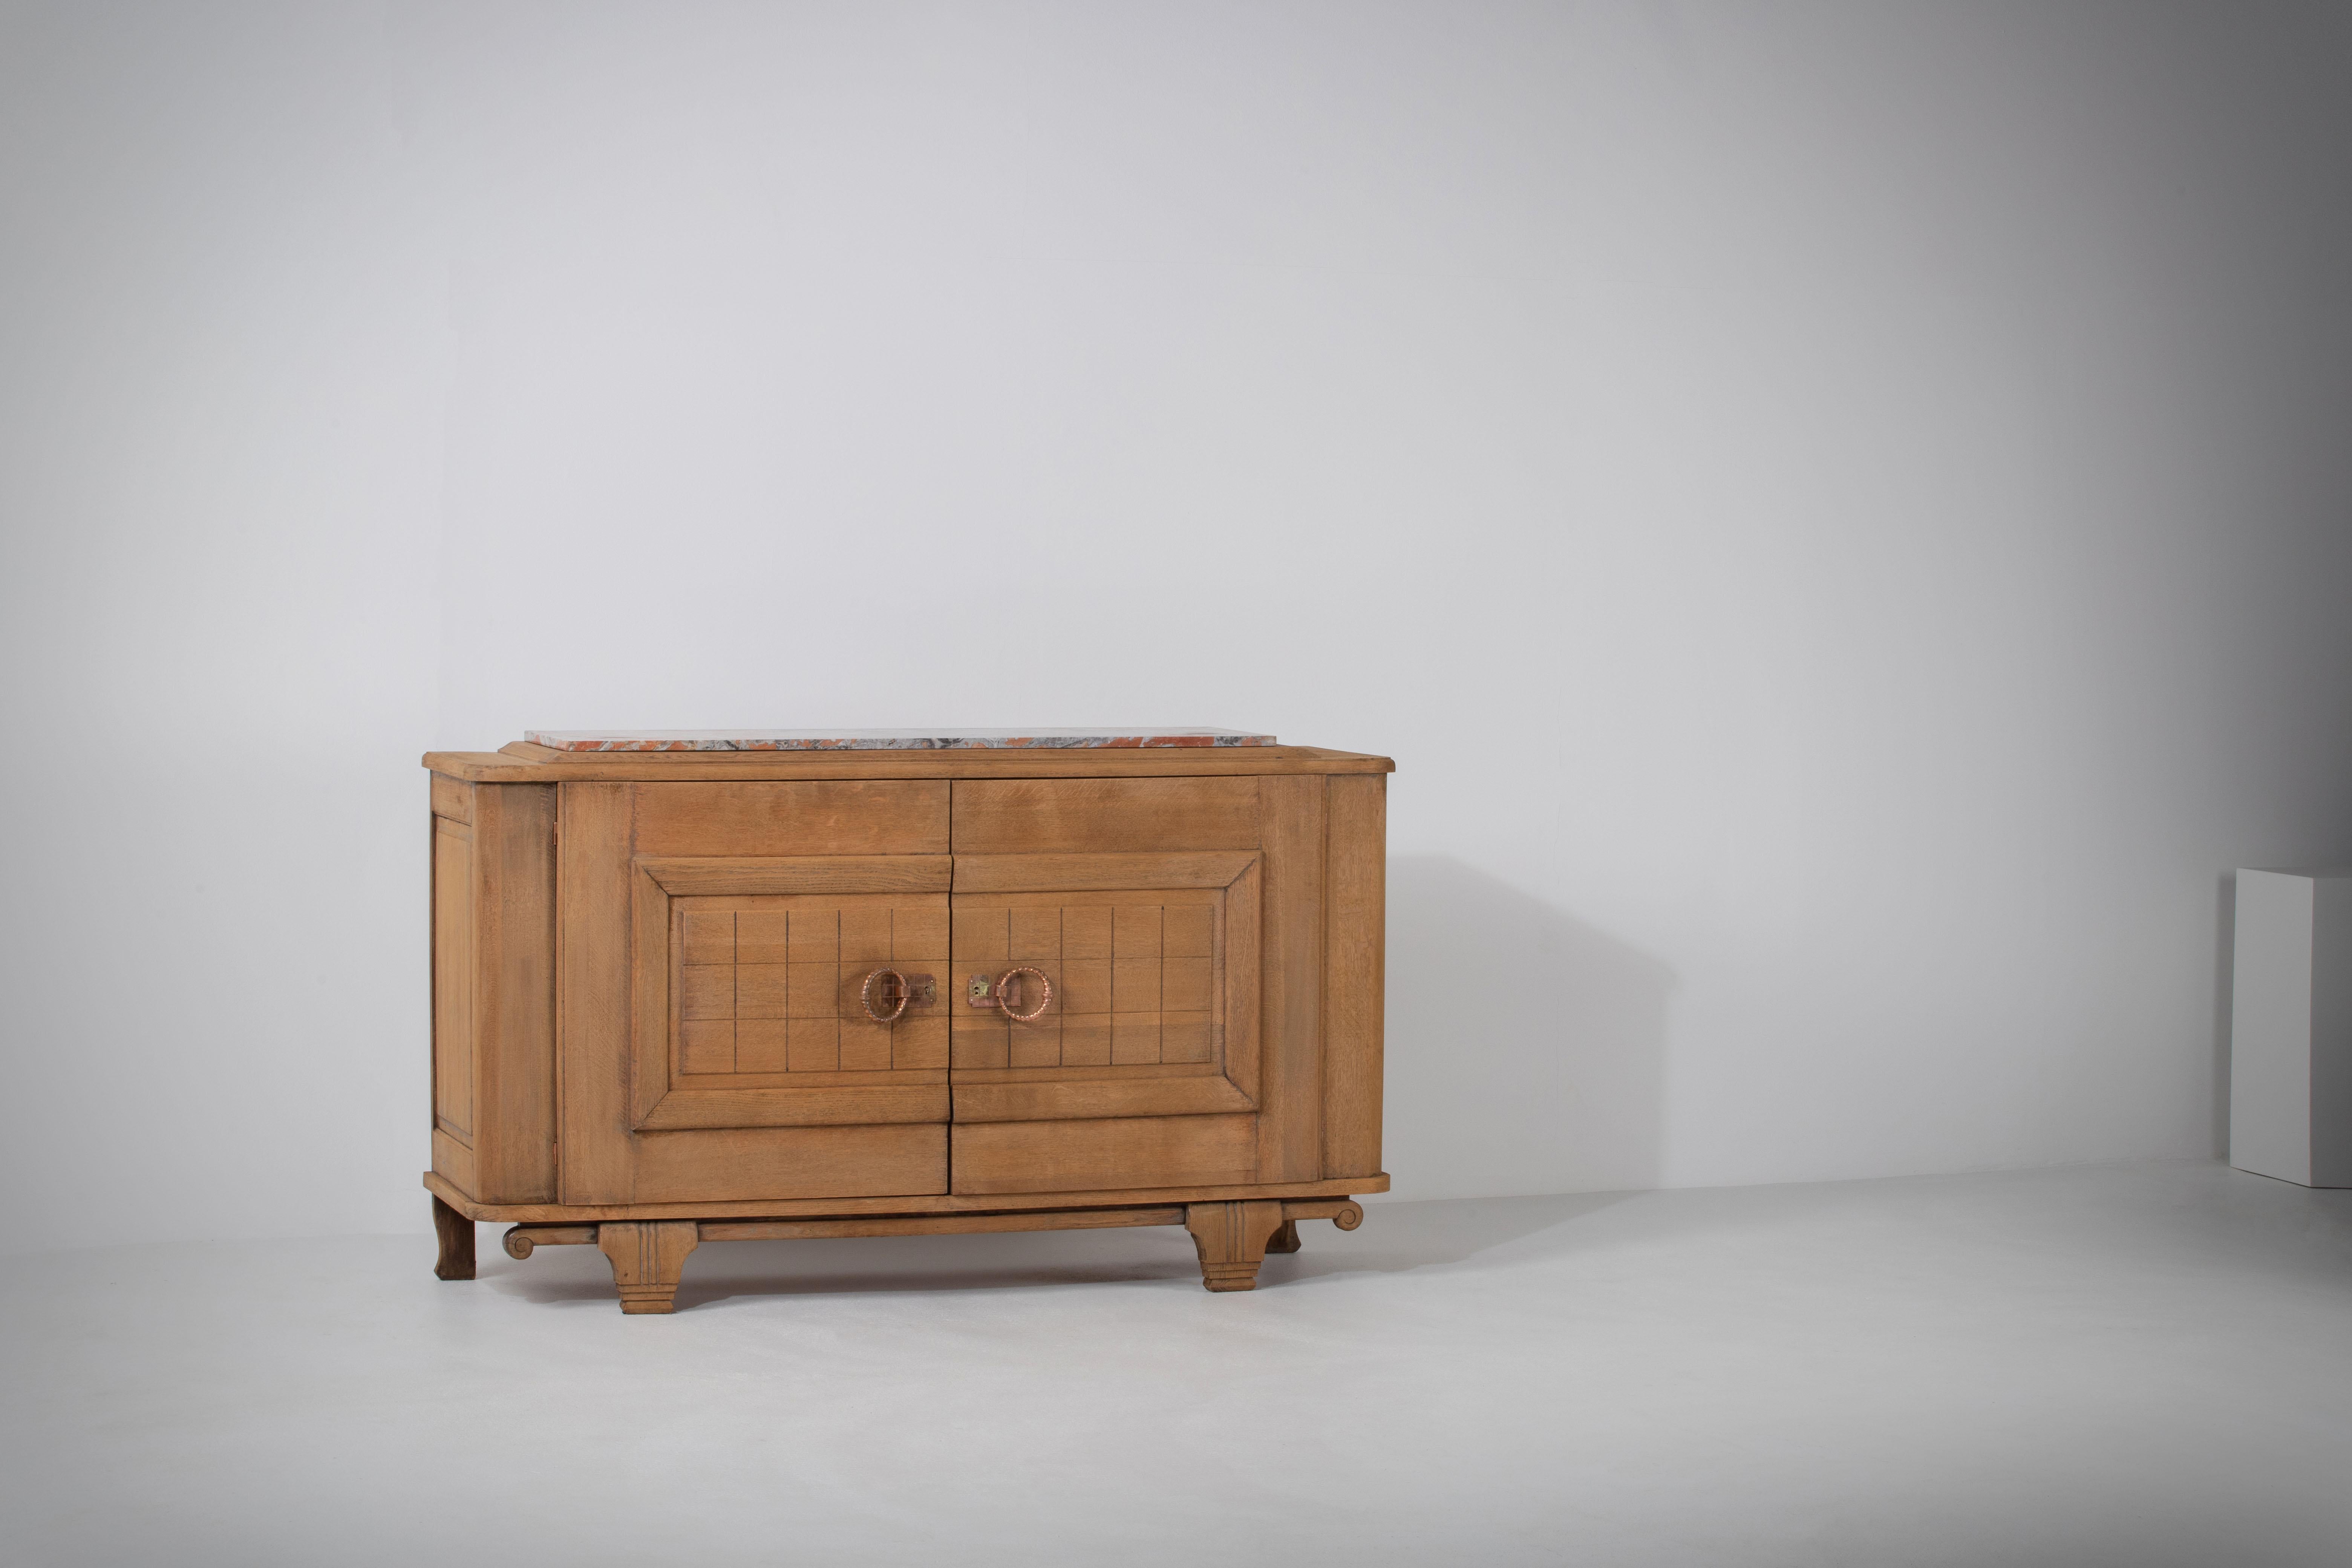 A large sideboard/credenza presumably by Charles Dudouyt. 
France, c1930s.
Consists of four doors providing shelves storage compartments and two central drawers. 
Brass detailing and graphic design doors make this piece really stand out.
The